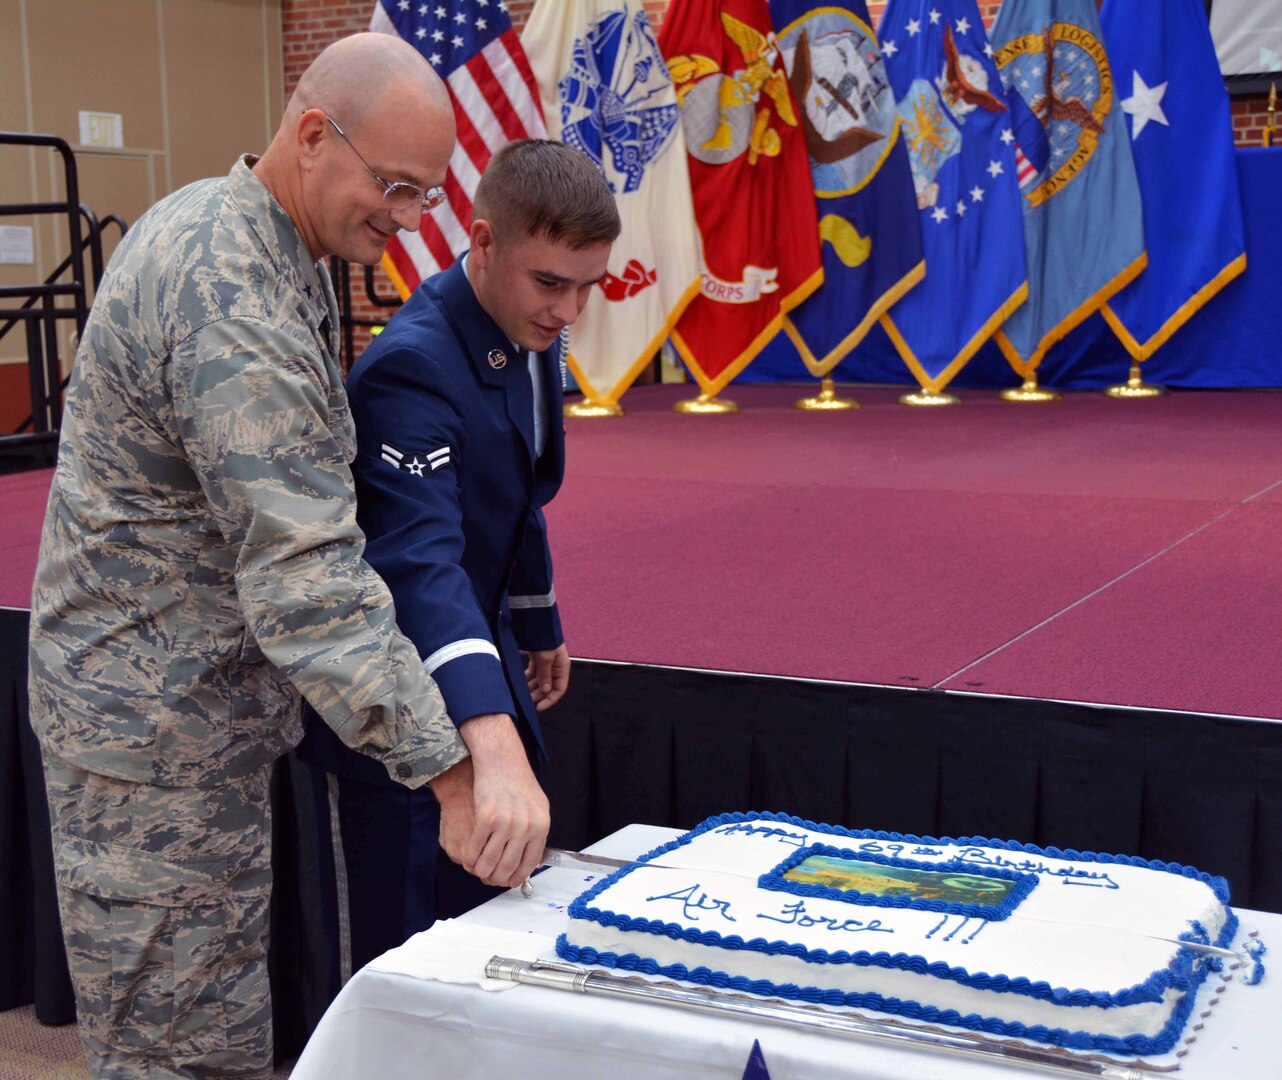 Airman 1st Class Ezre Pennington from Langley Air Force Base, Hampton, Virginia, joins Defense Logistics Agency Aviation Commander Air Force Brig. Gen. Allan Day in cutting the cake during the Air Force’s 69th birthday ceremony held at the Lotts Center on Defense Supply Center Richmond, Virginia, Sept. 22, 2016. 